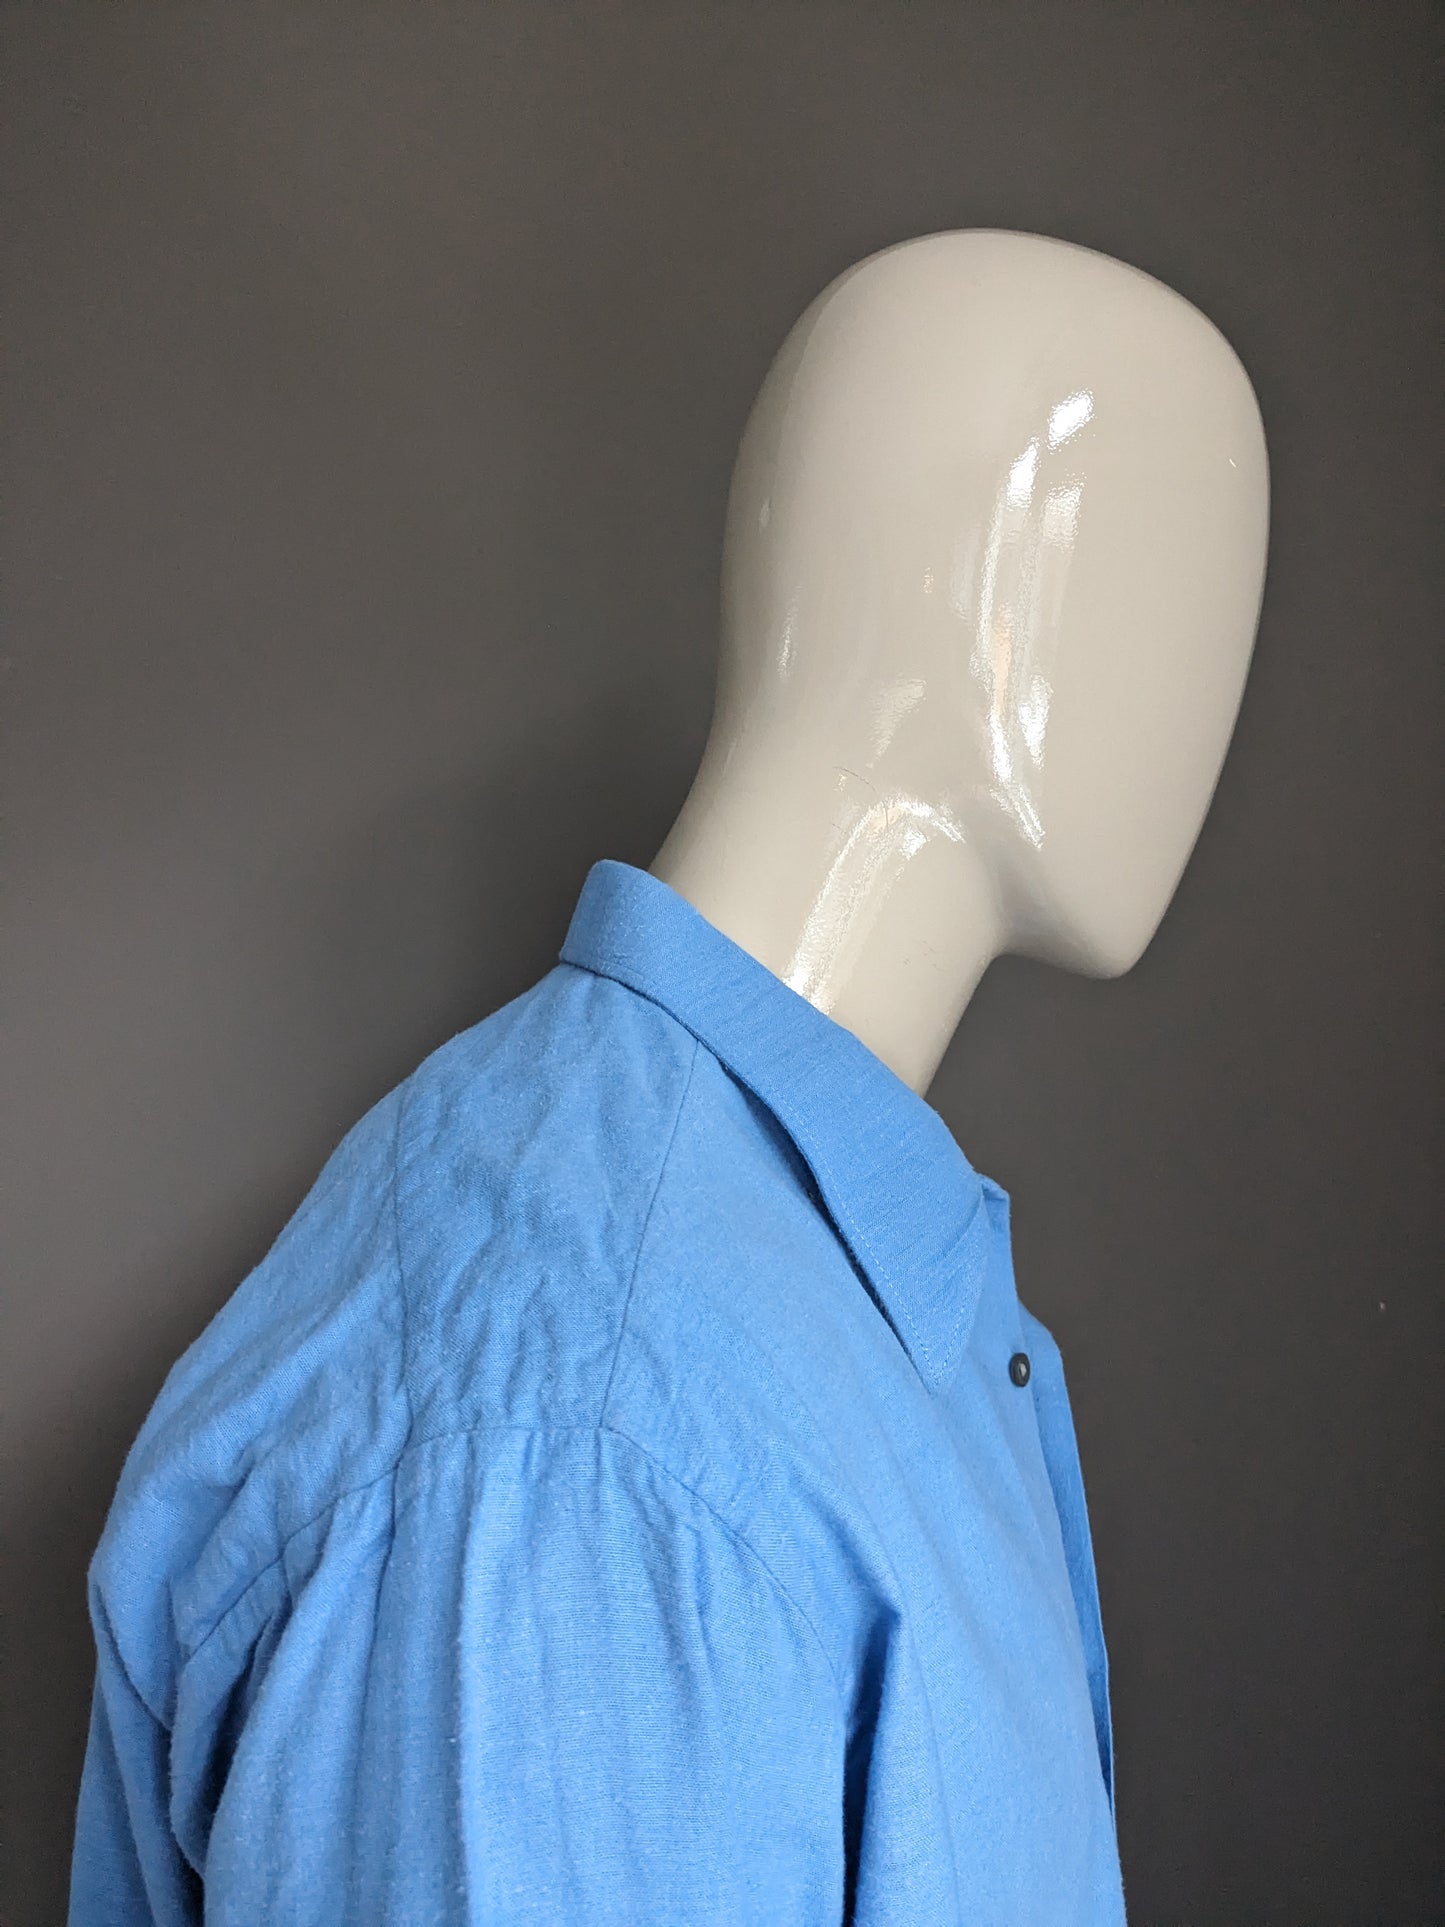 Vintage 70's shirt with point collar. Blue colored. Size 2XL / XXL.